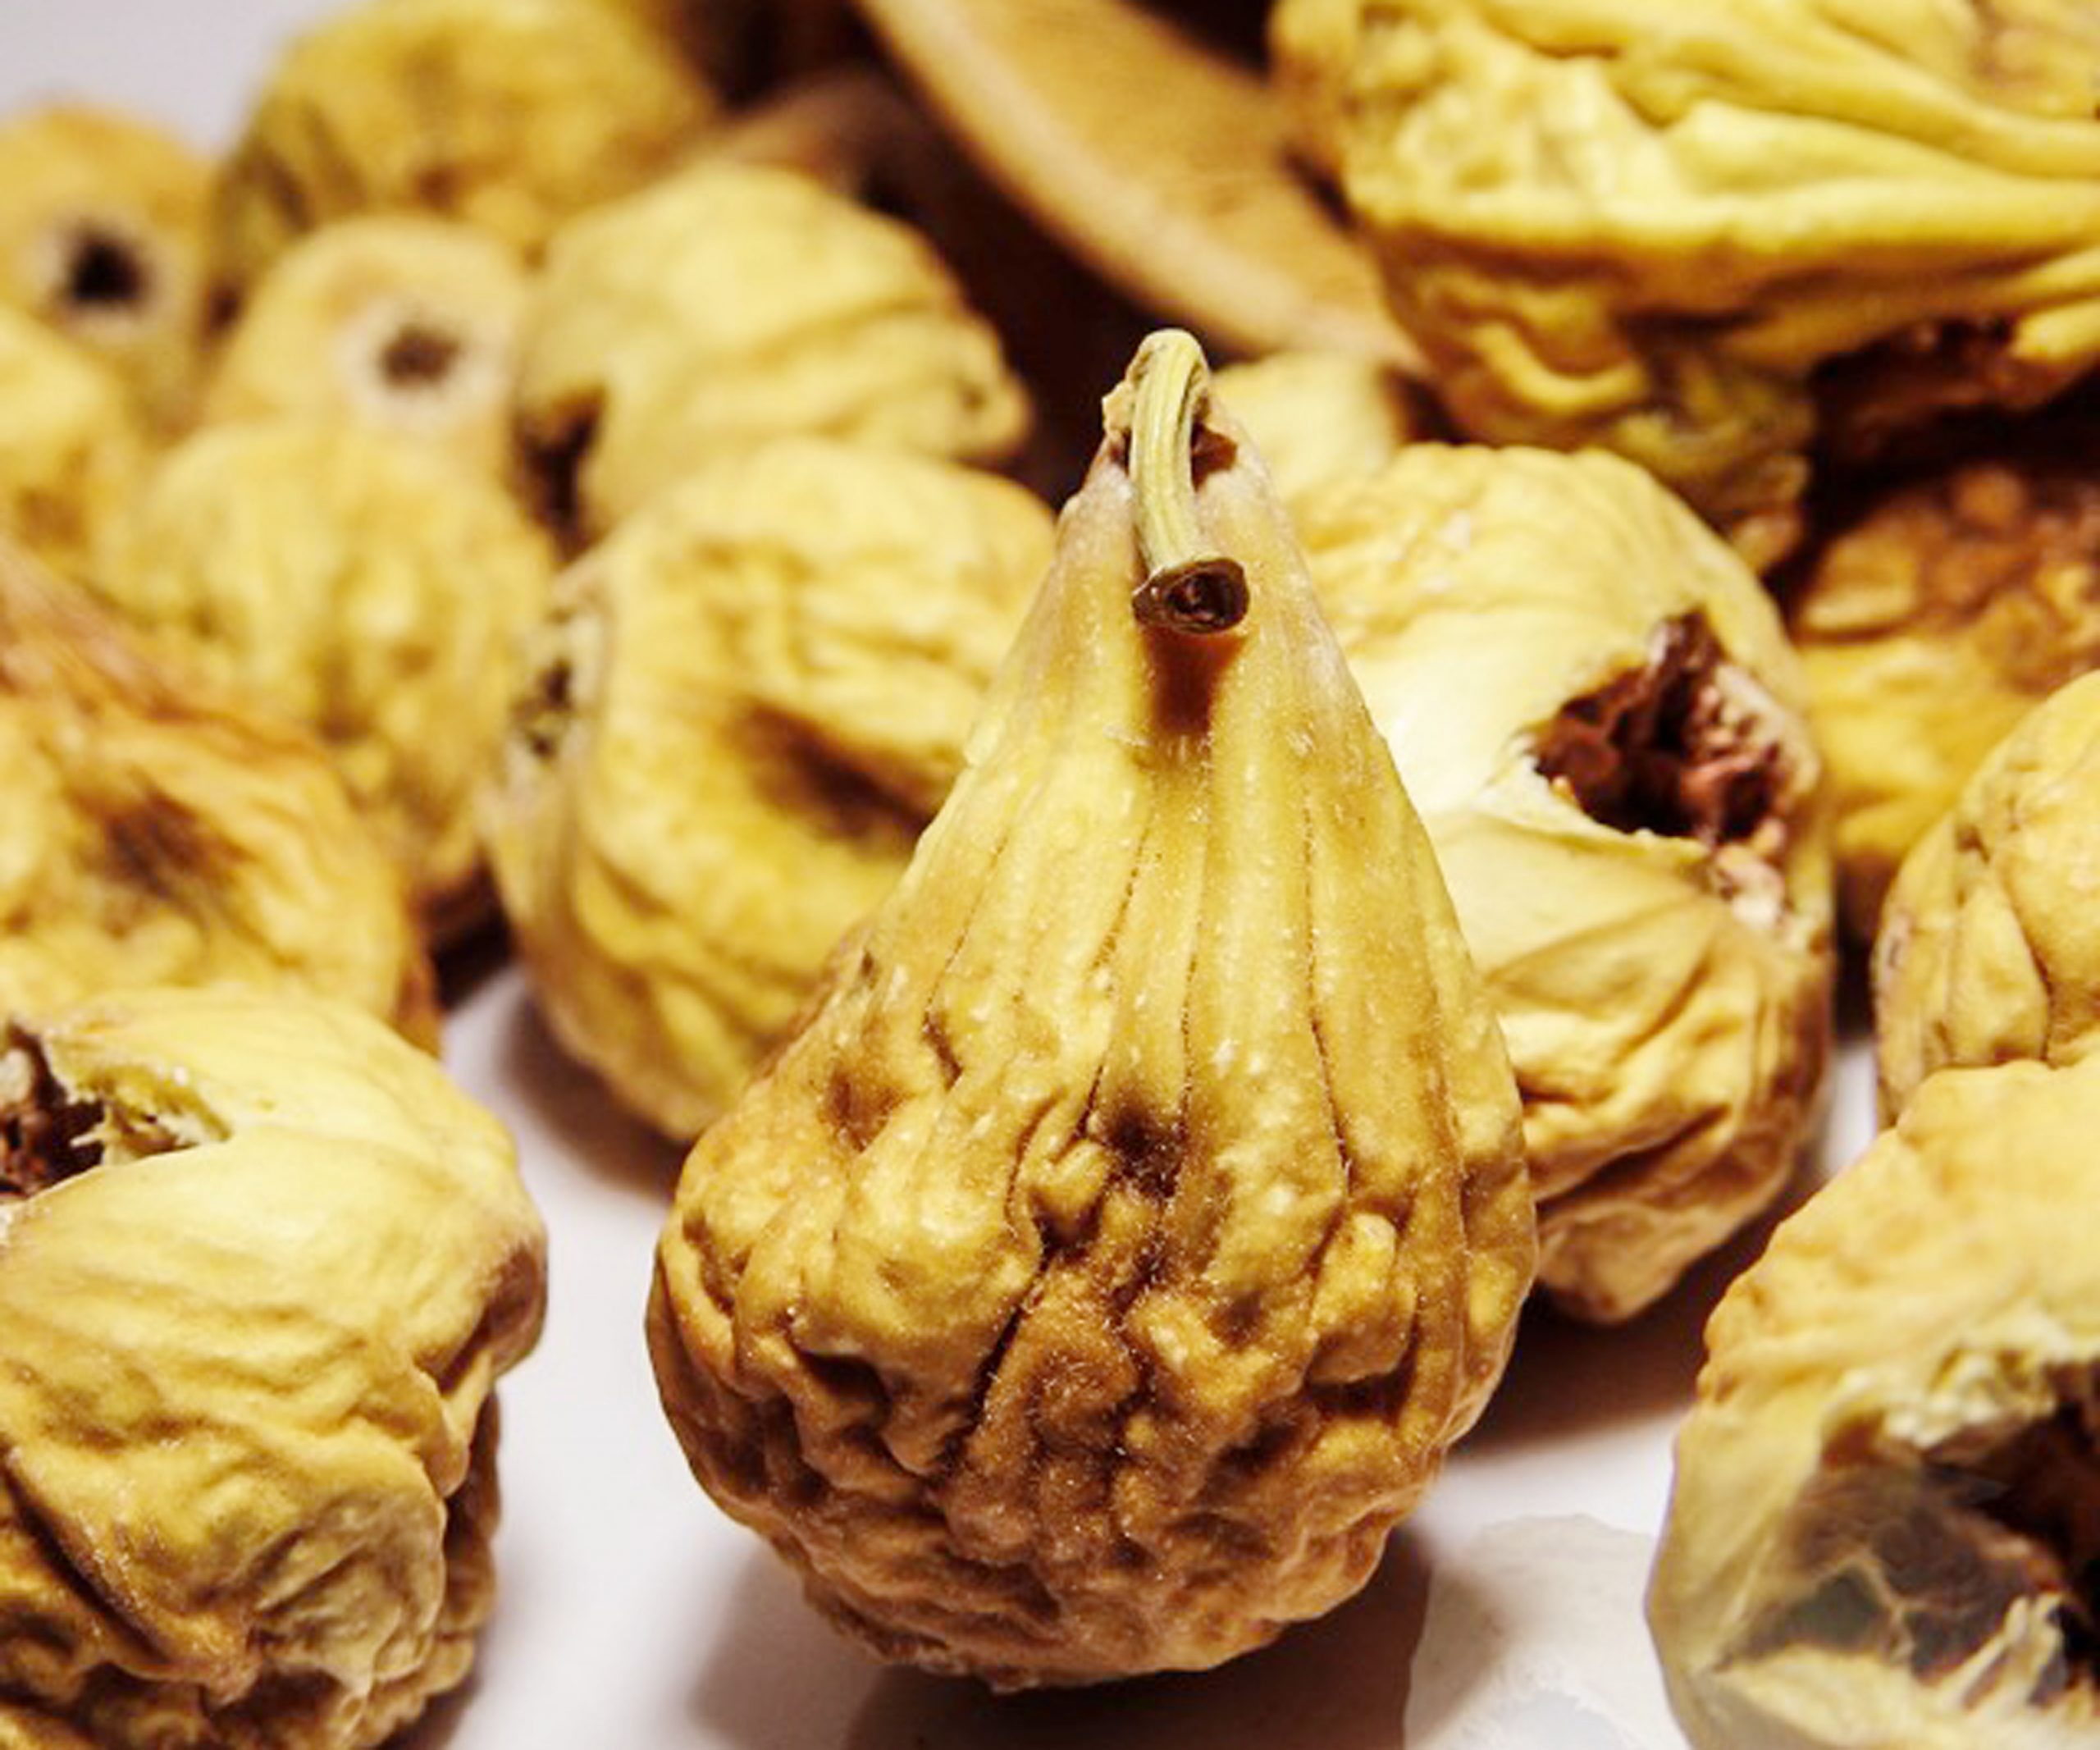 Iranian Dried Fig Supplier - Wholesale Price of Dried Figs - Nutex dried fruits company 